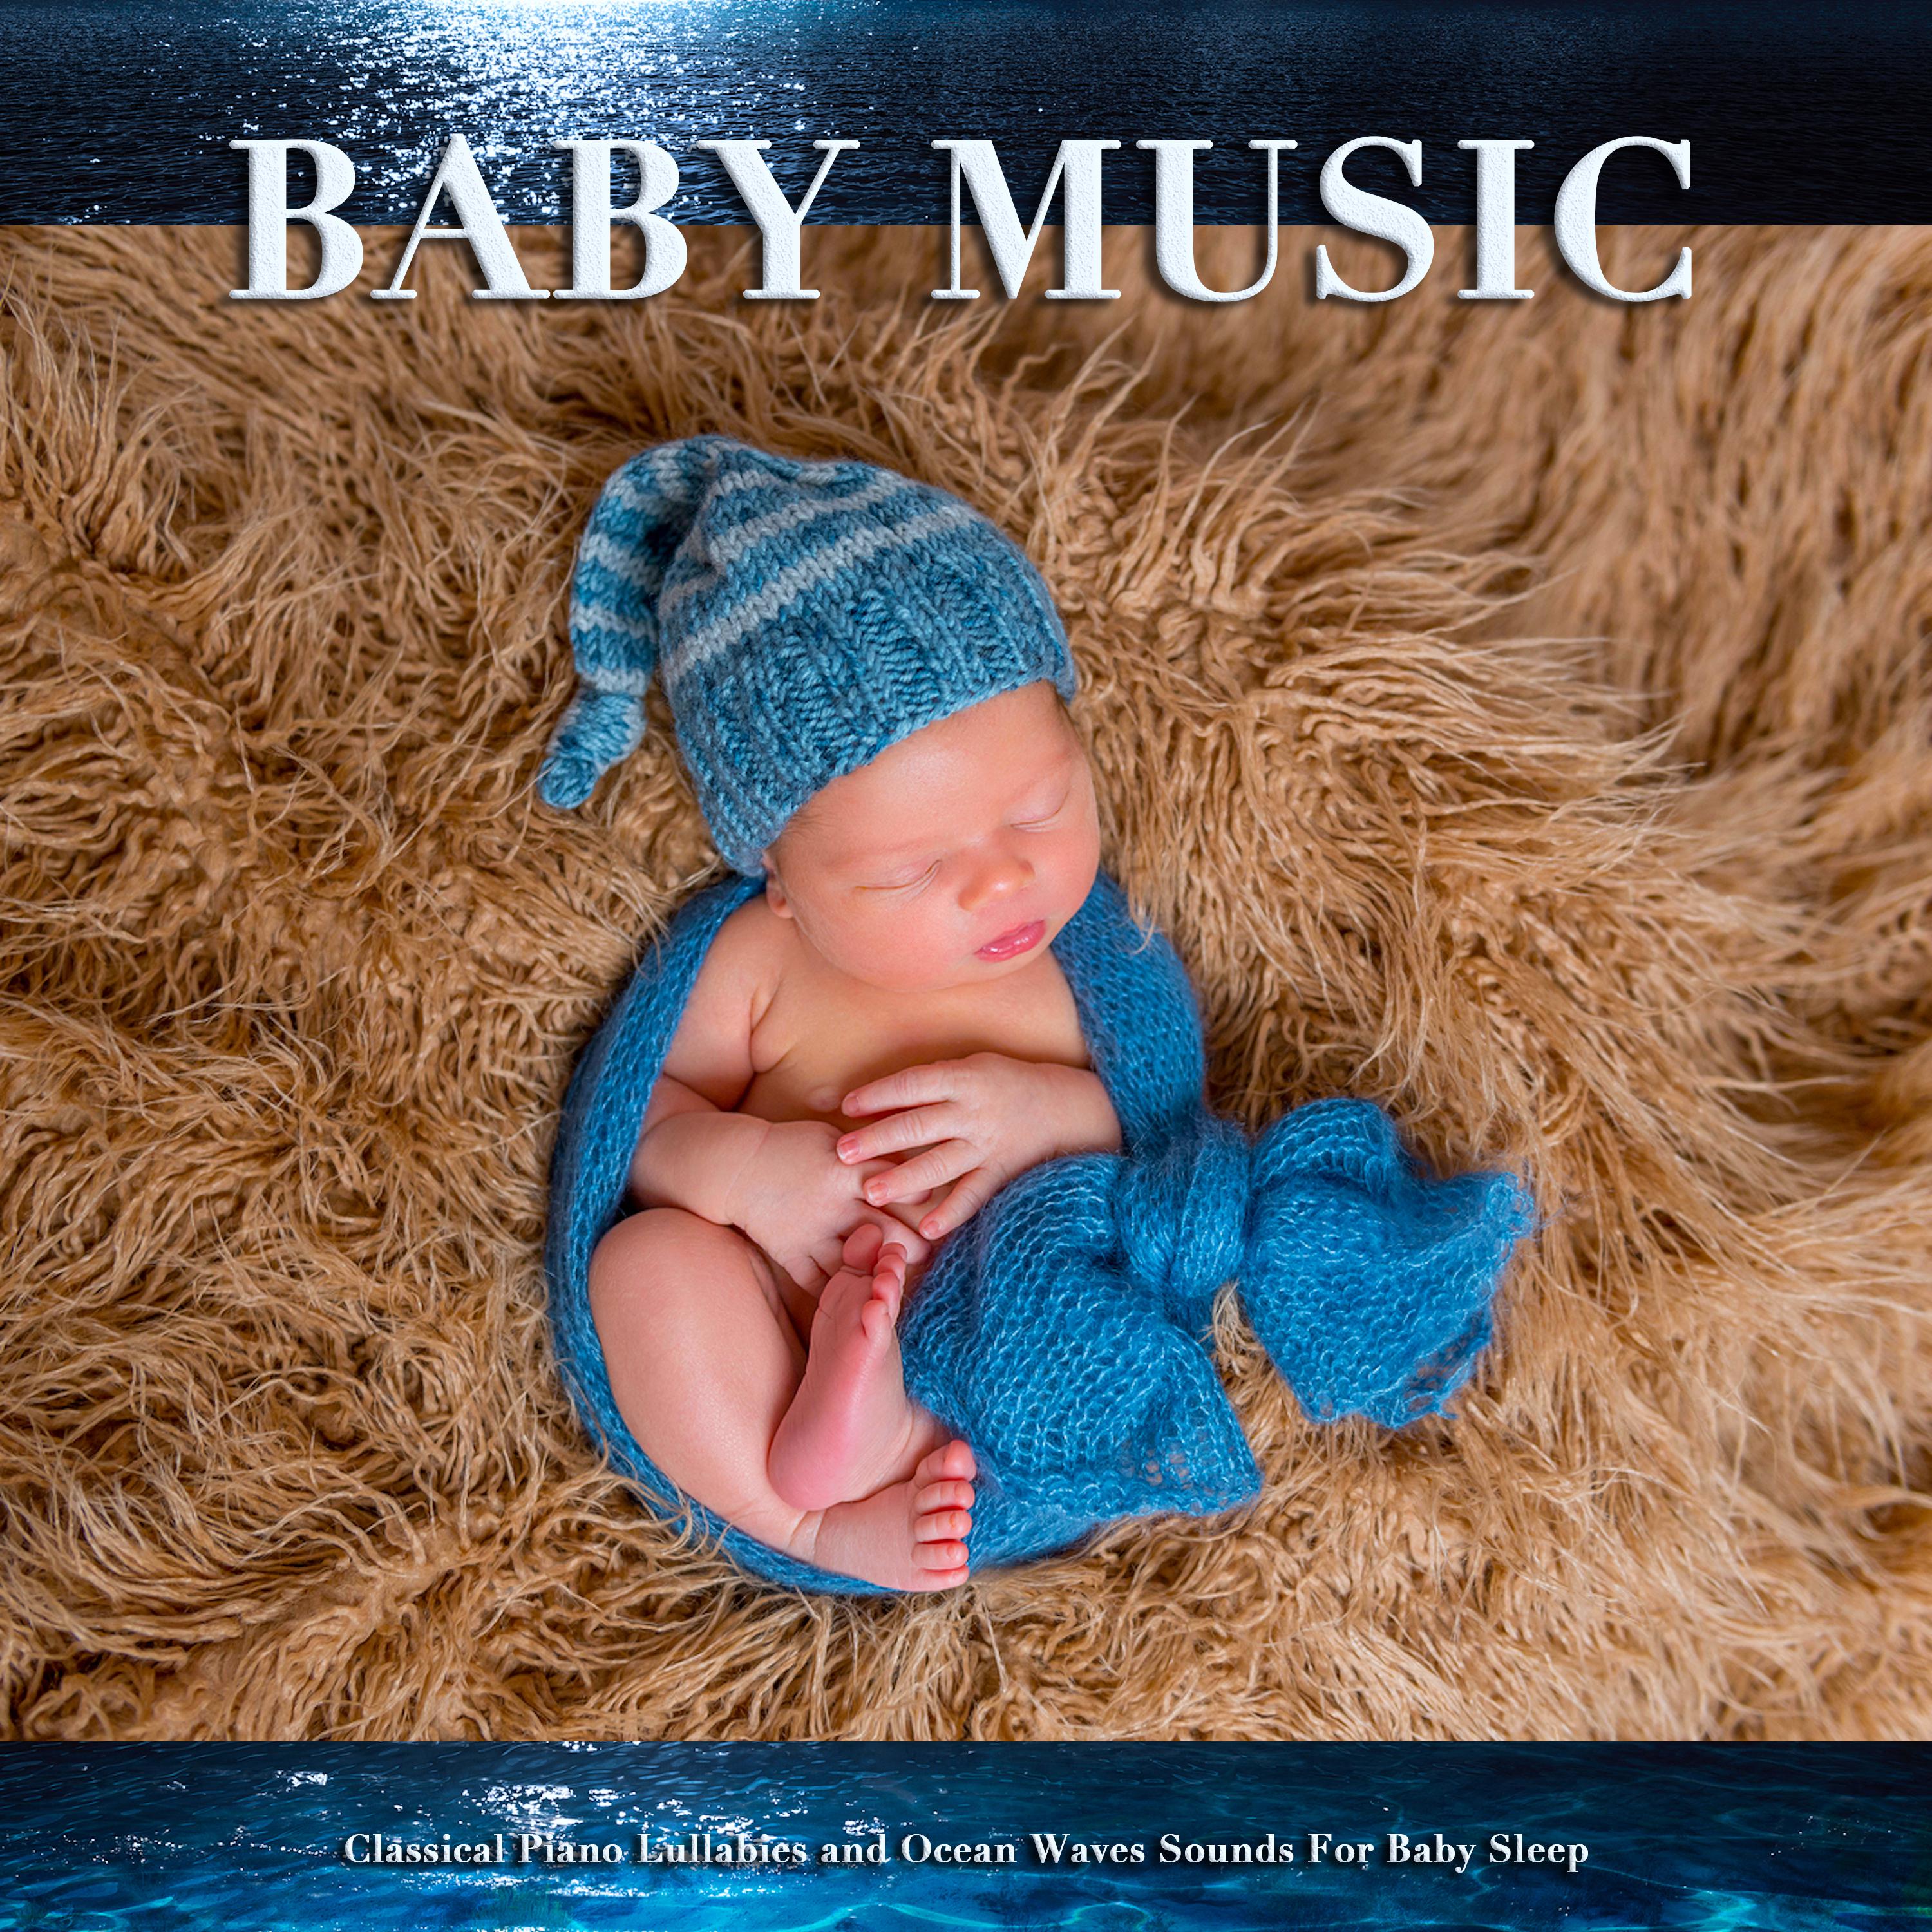 Claire De Lune - Debussy - Classical Baby Music - Ocean Waves Sleep Aid